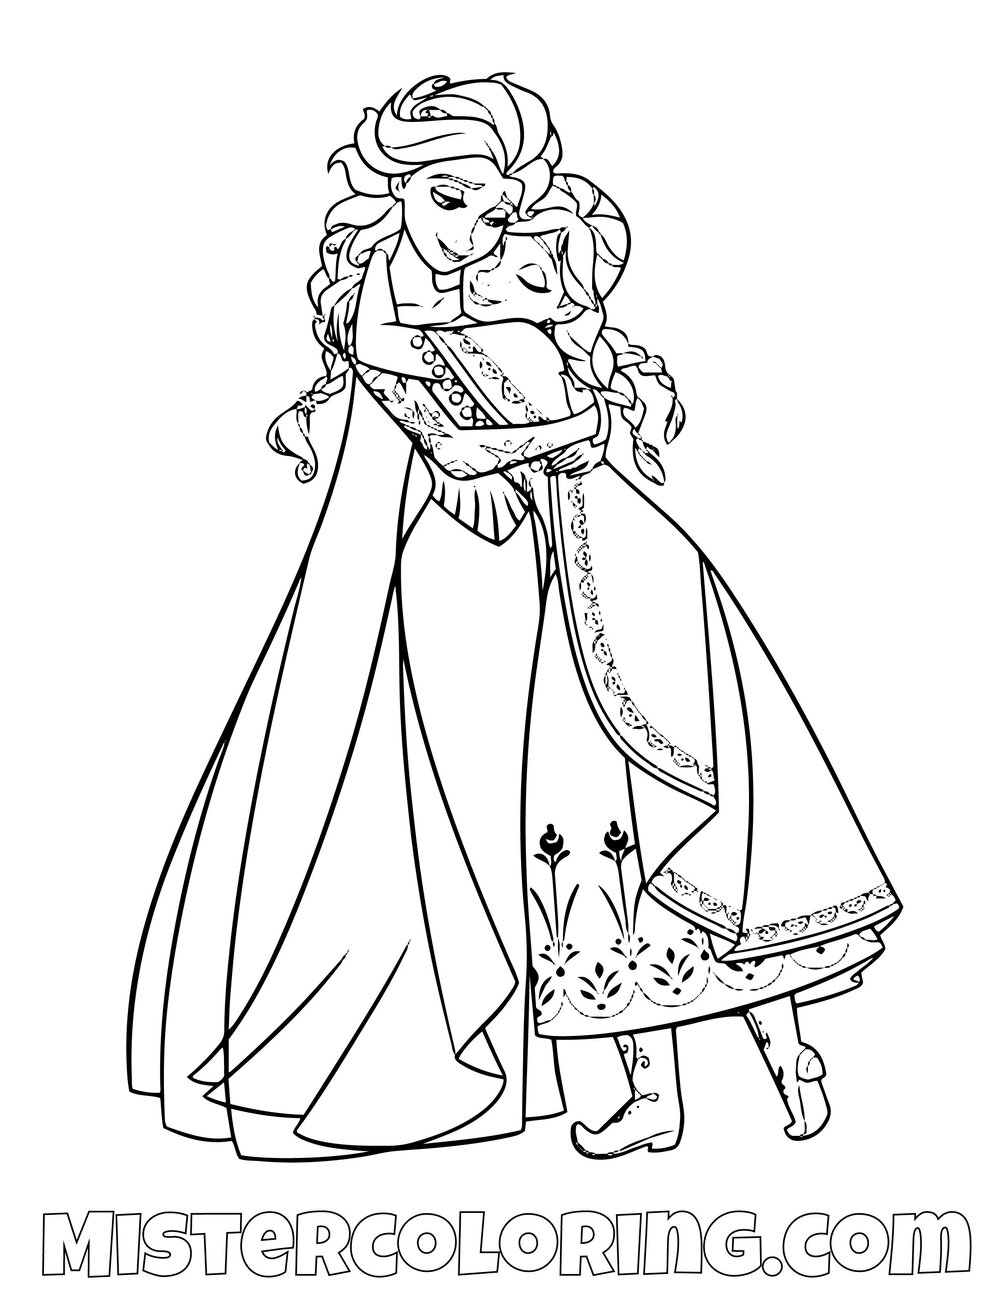 Coloring Pages Coloring Pages Fantastic Elsa And Anna Haramiran Queenncess Hugging Frozen For Kids Compressor Gamesntable Princess Anna Coloring Pages Mommaonamissioninc Coloring Home